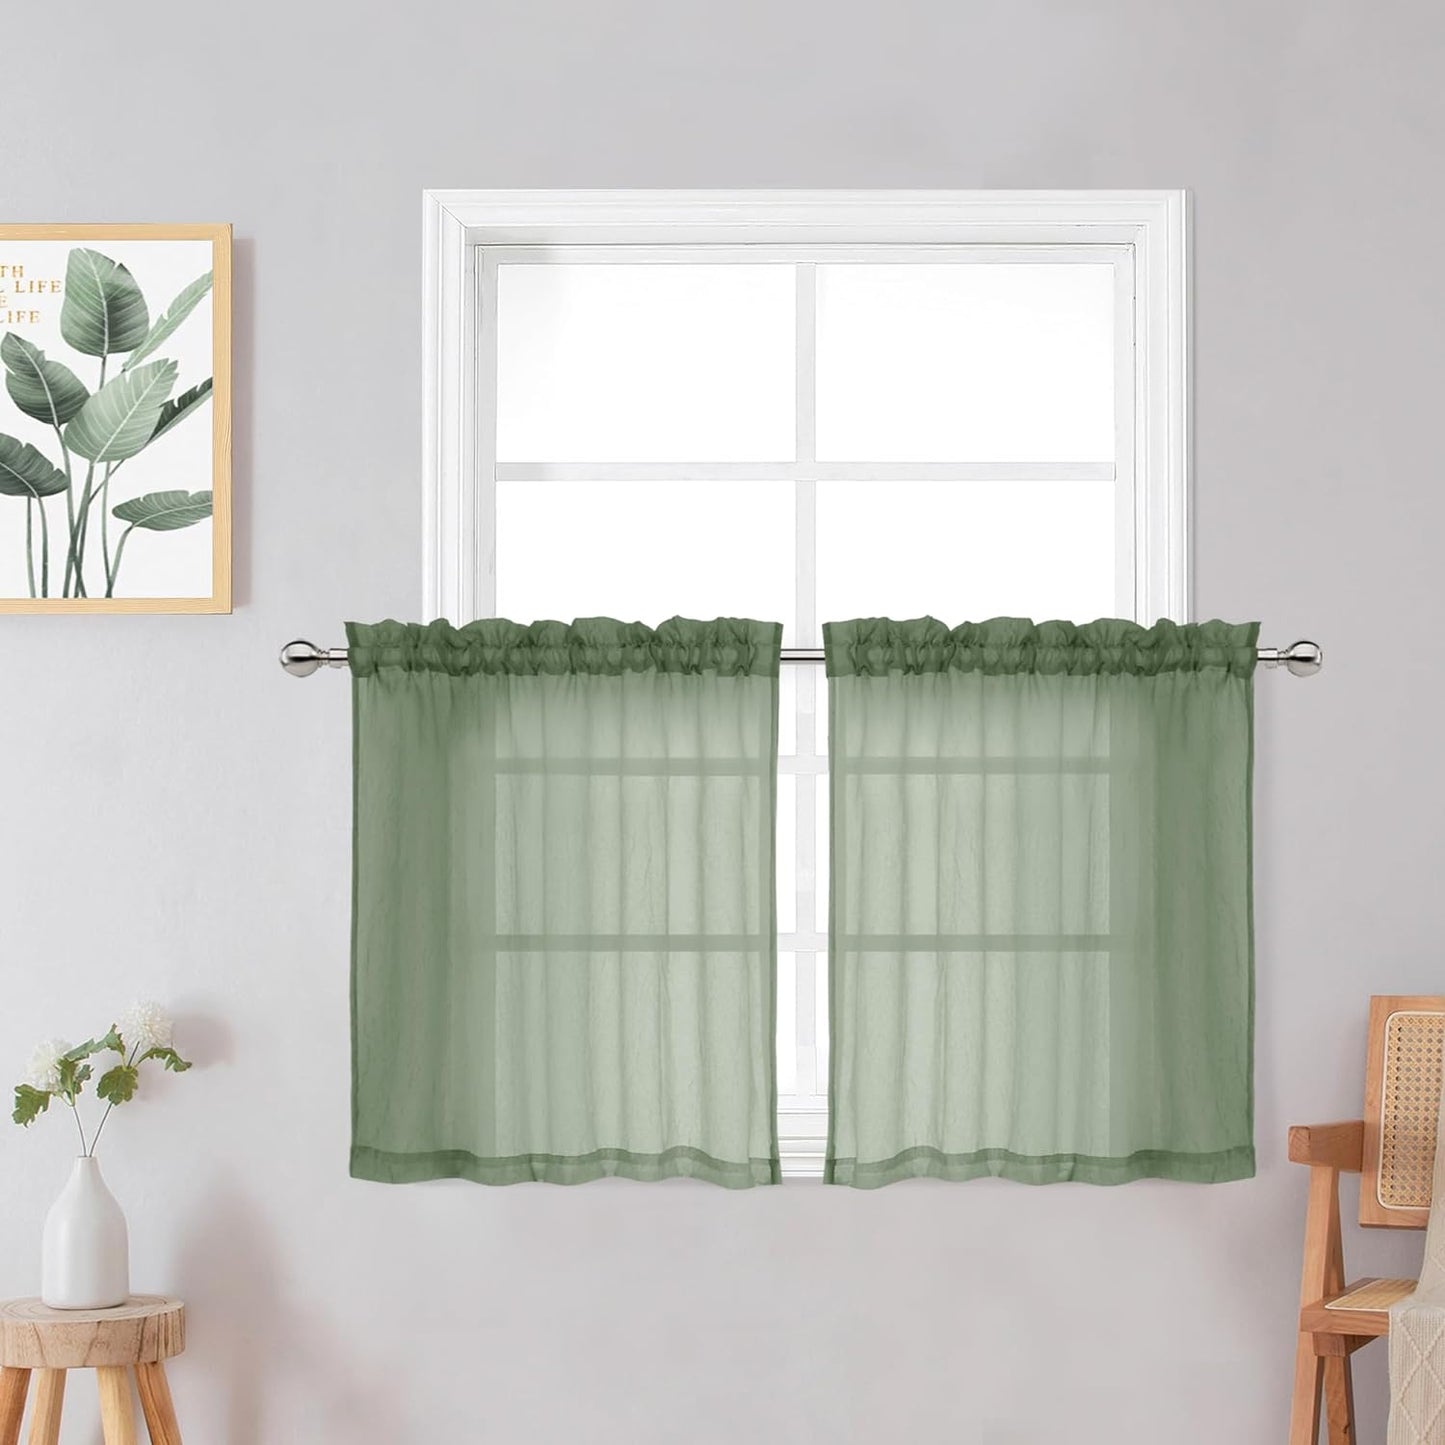 Chyhomenyc Crushed White Sheer Valances for Window 14 Inch Length 2 PCS, Crinkle Voile Short Kitchen Curtains with Dual Rod Pockets，Gauzy Bedroom Curtain Valance，Each 42Wx14L Inches  Chyhomenyc Sage Green 42 W X 24 L 